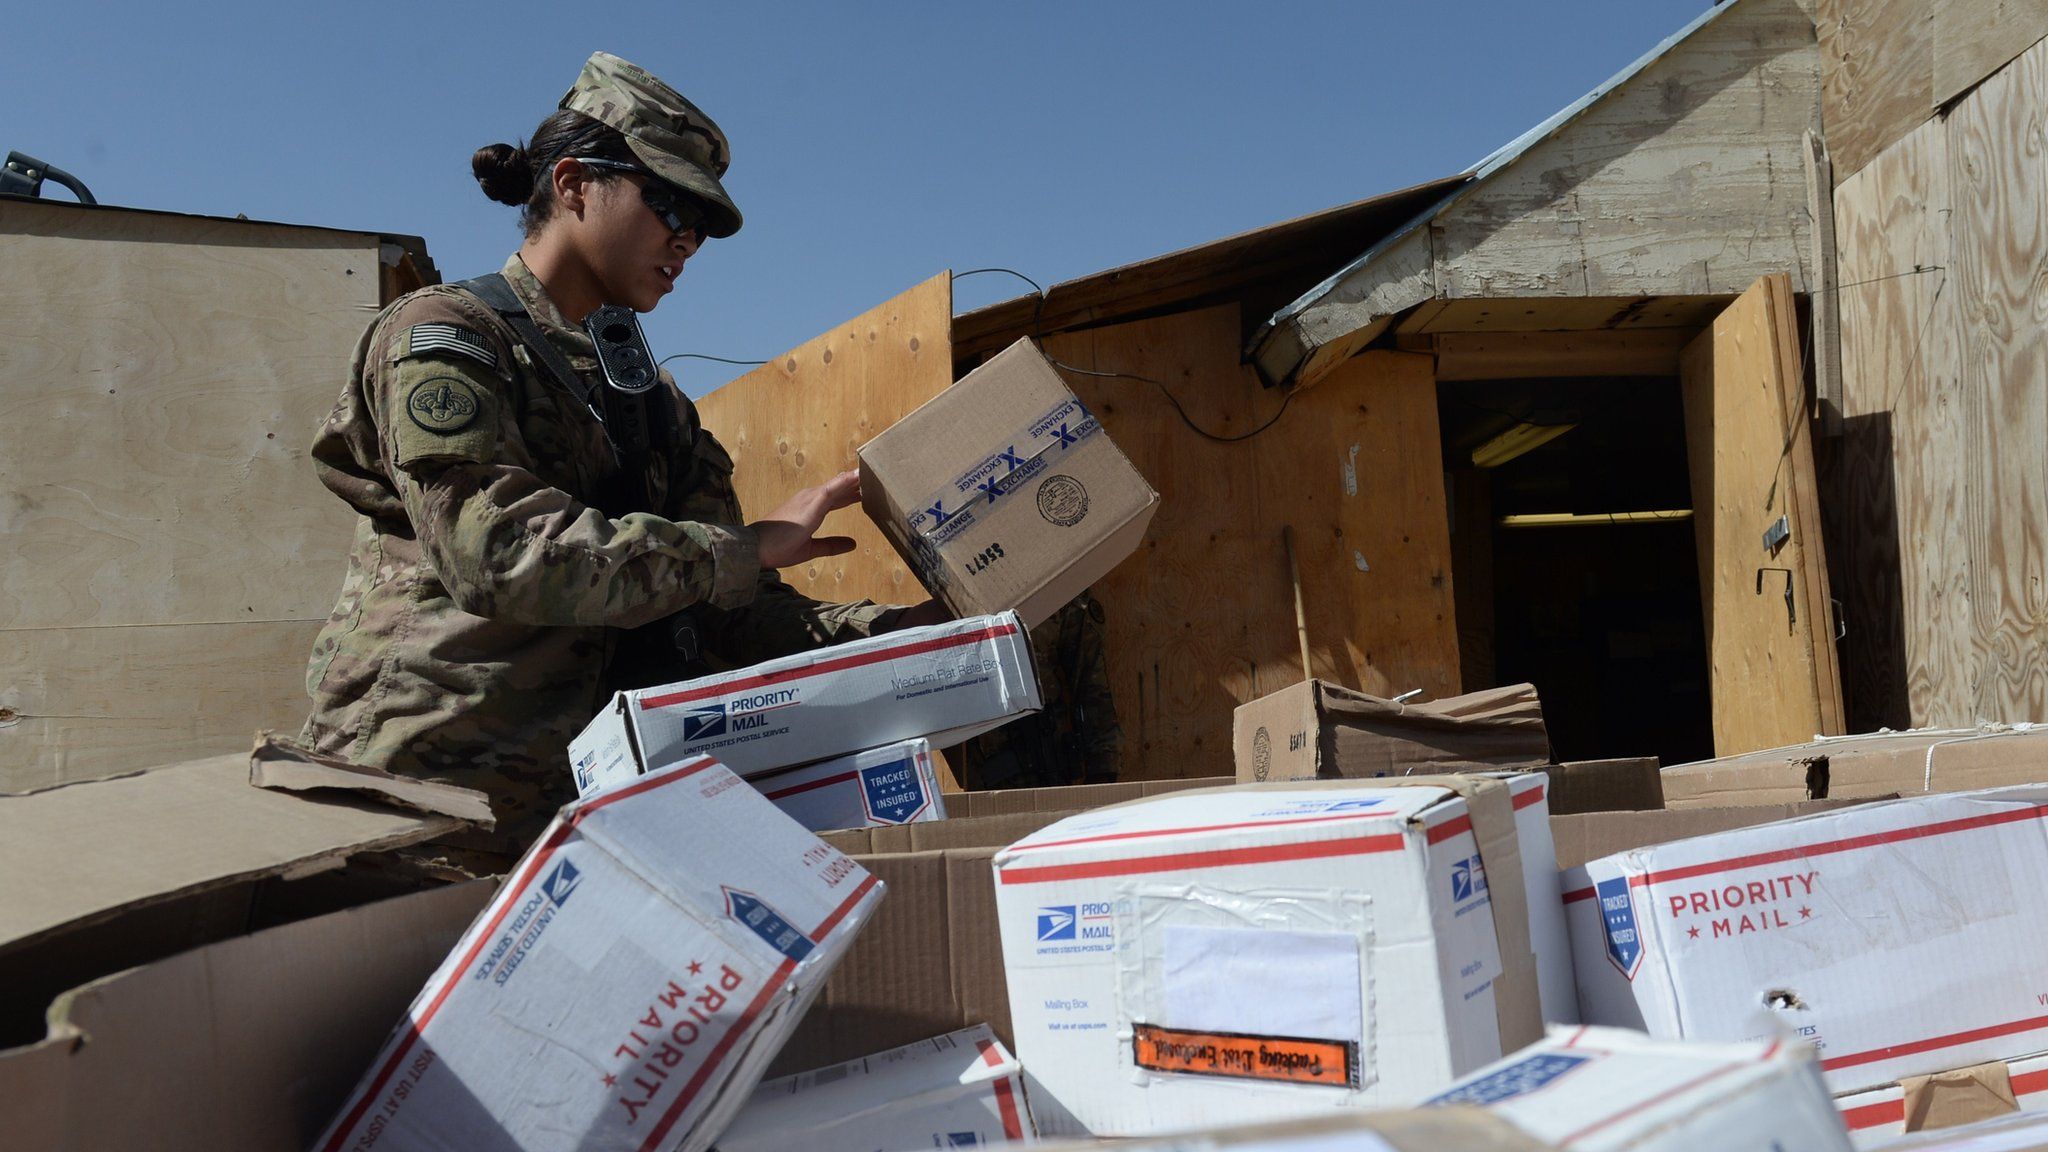 A US soldier sorts packages at a US base in Afghanistan